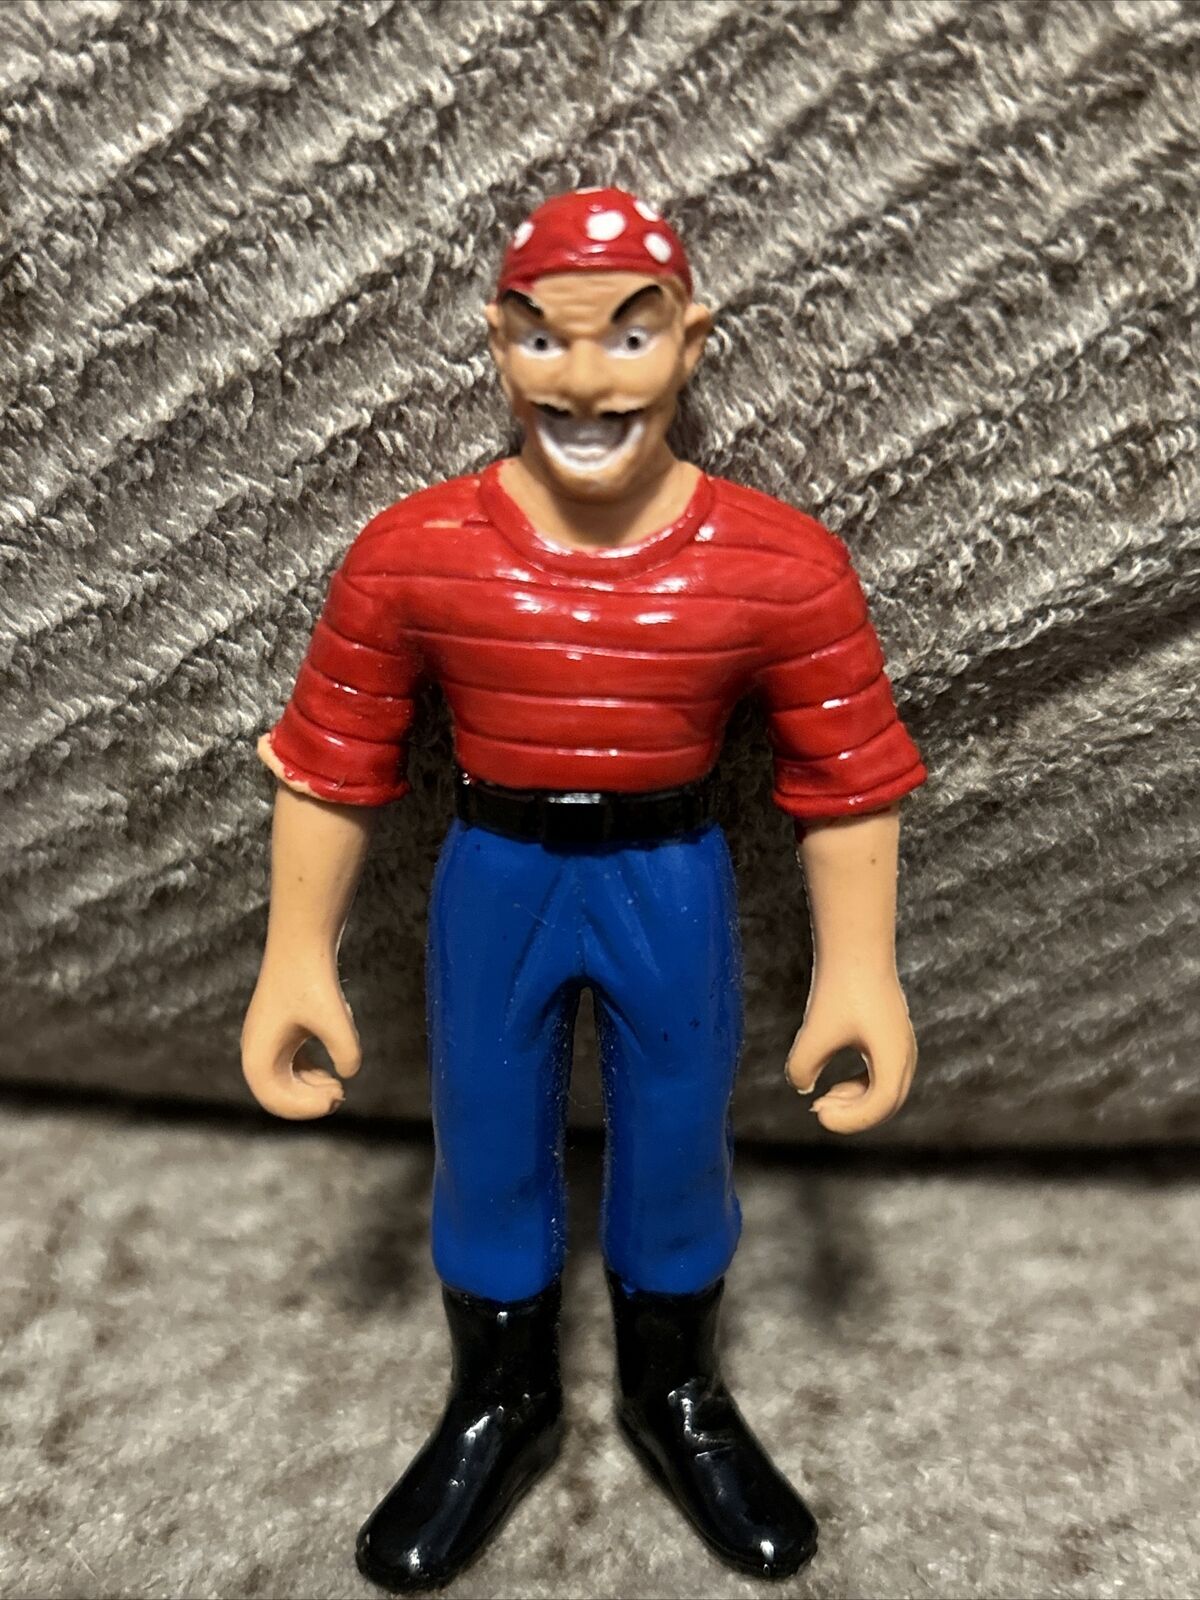 Vintage Really Hard To Find Rare Pvc 2 Inch Pirate Figurine . 1980s